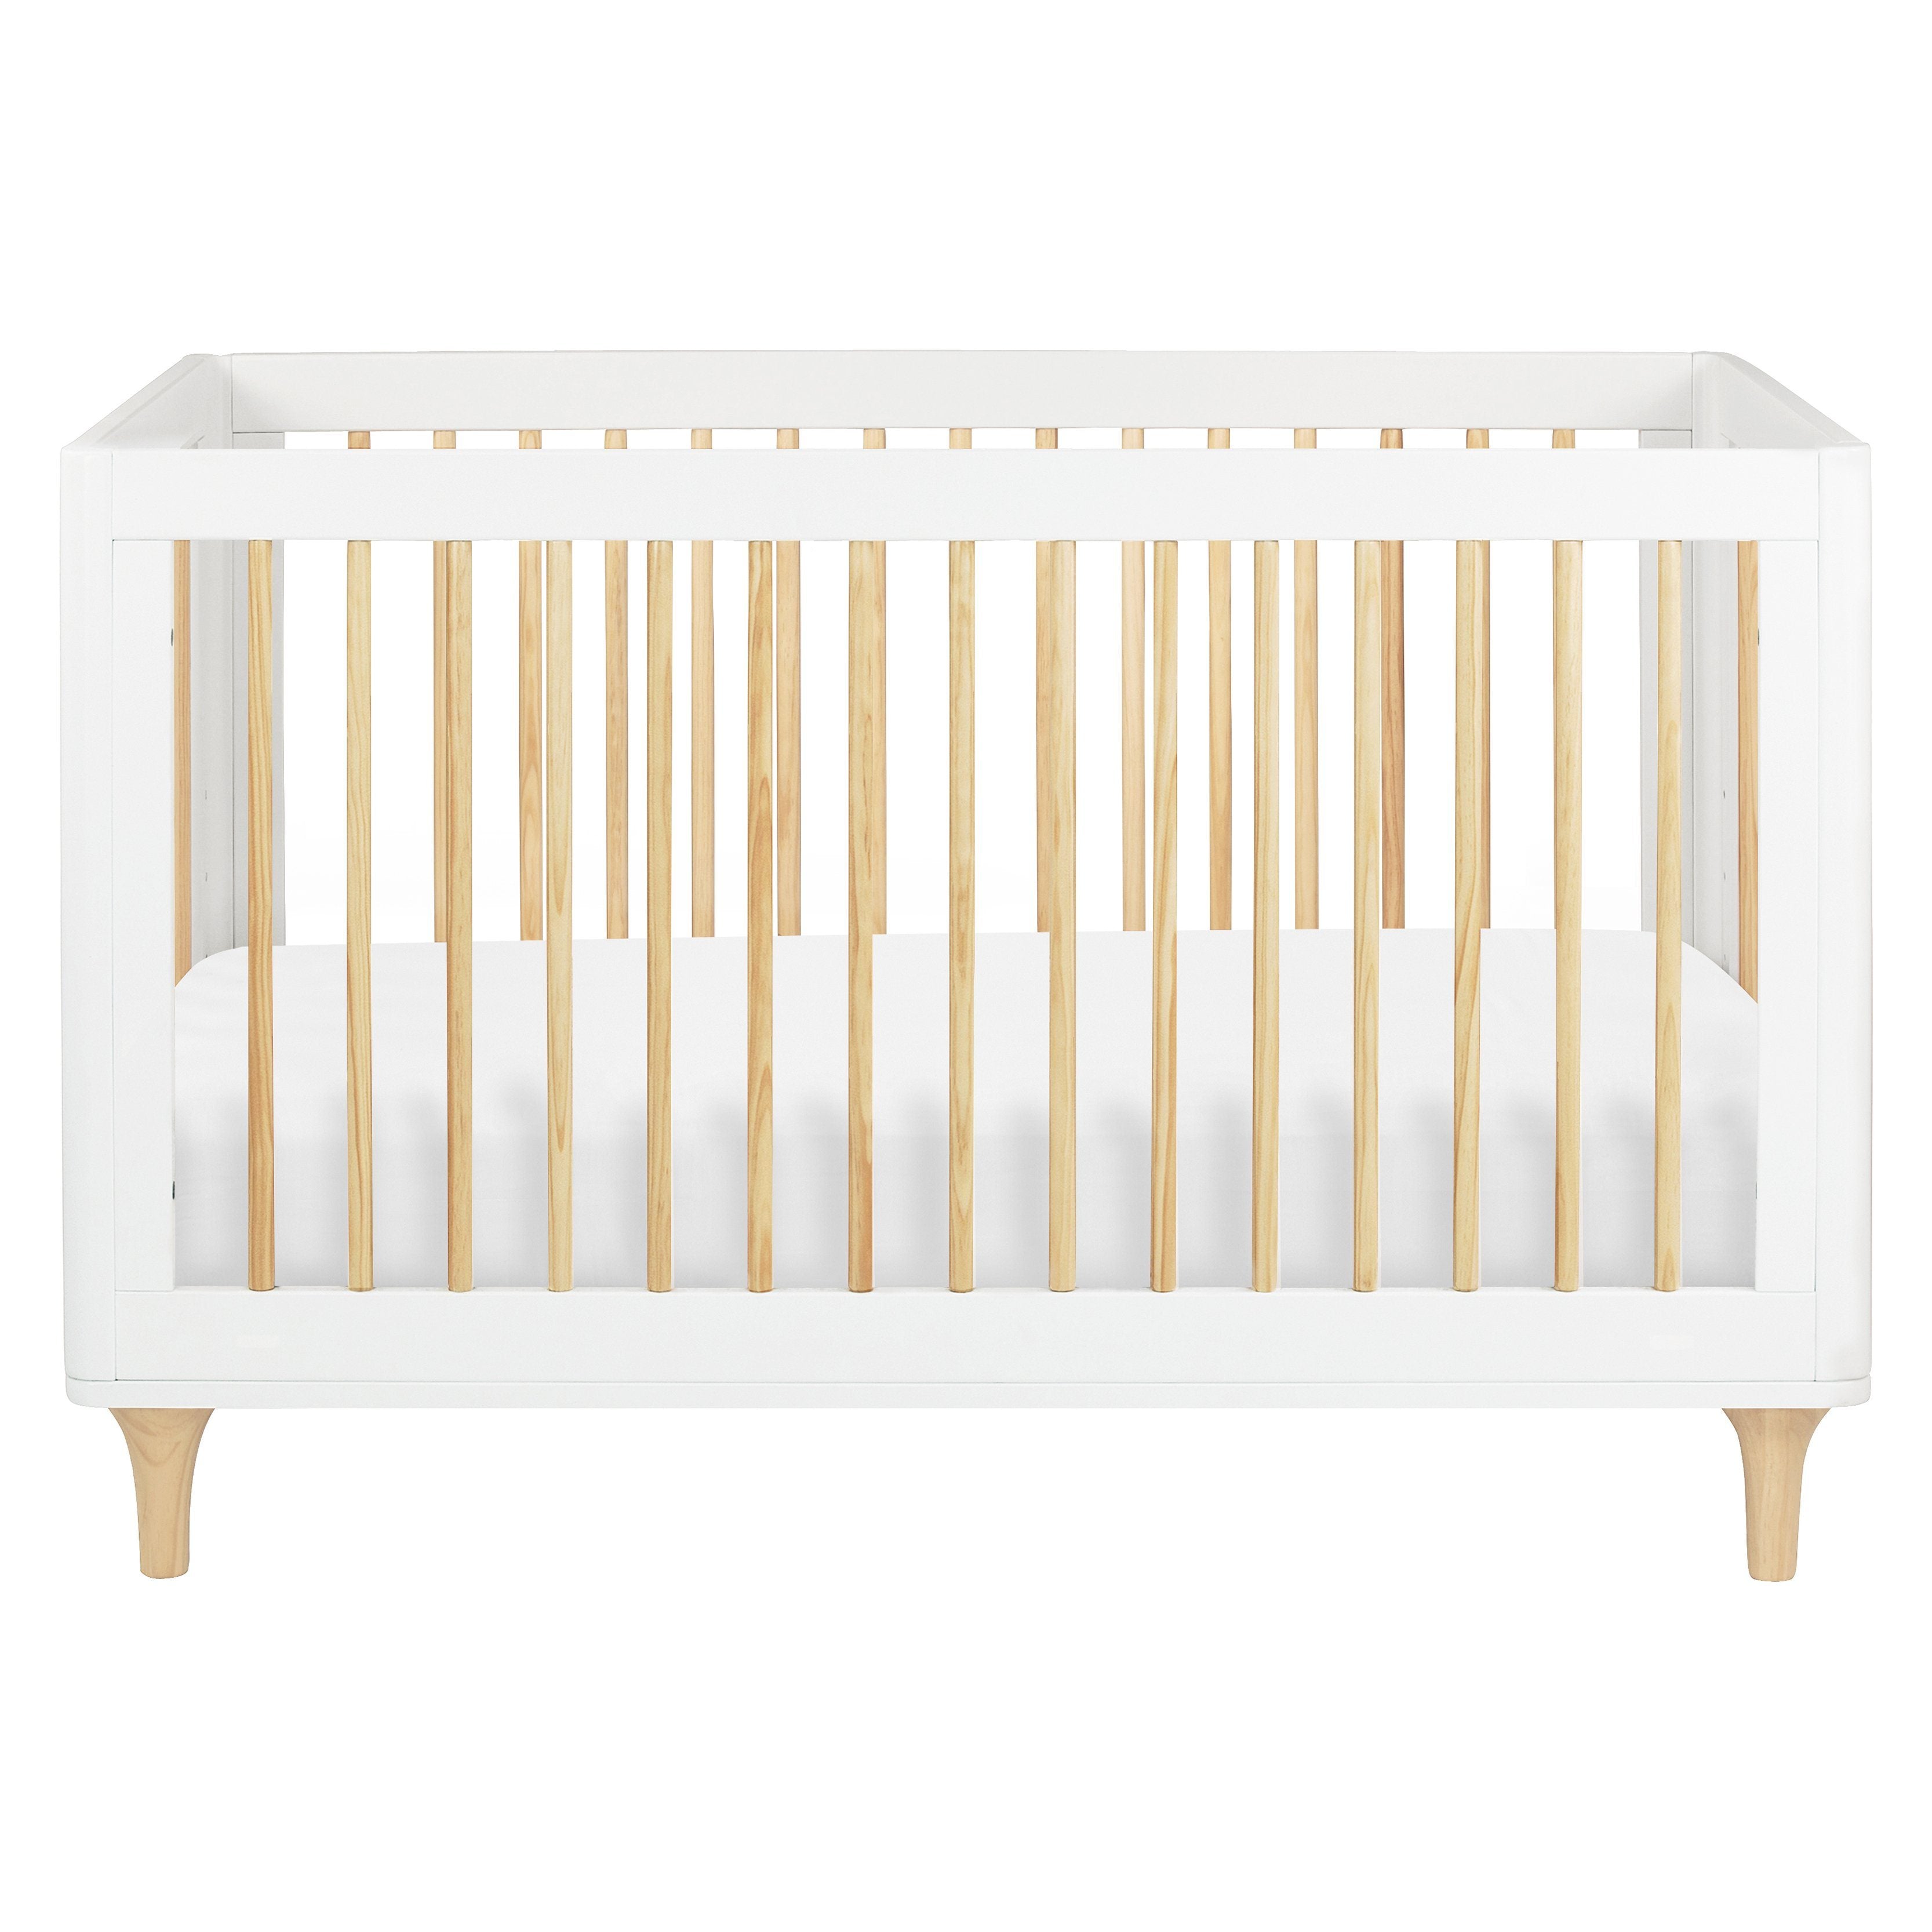 Lolly 3-in-1 Convertible Crib With Toddler Bed Conversion Kit - White